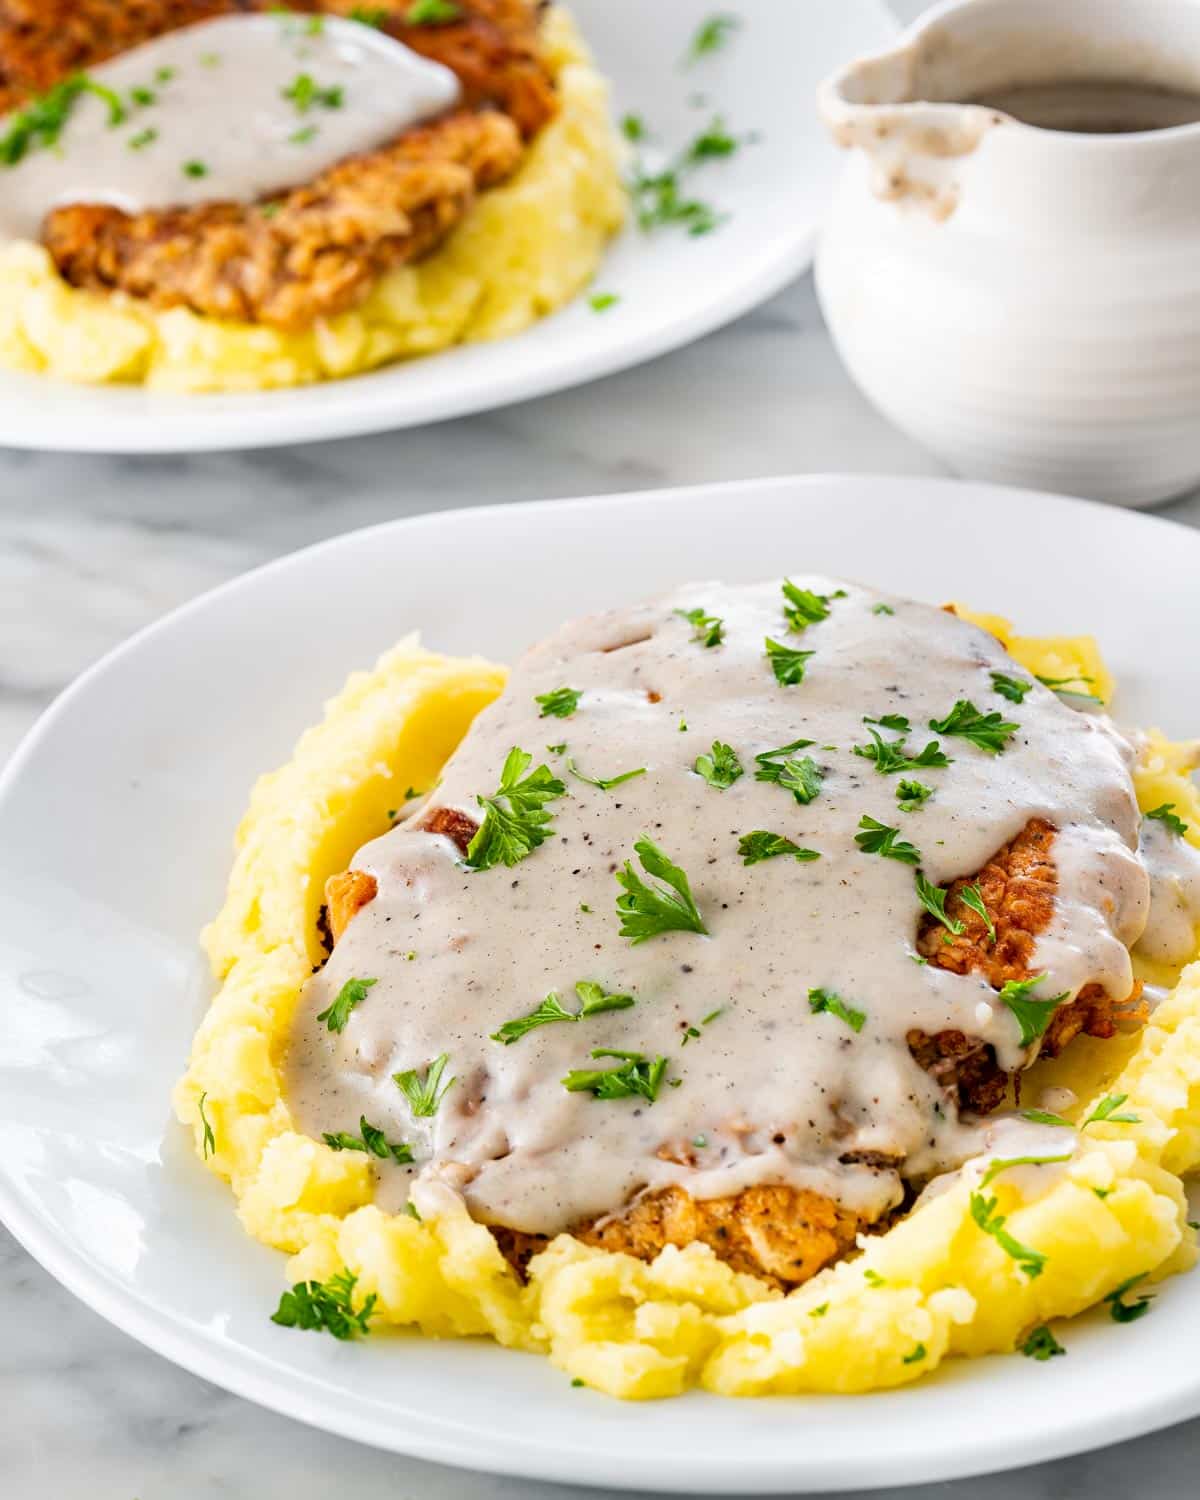 chicken fried steak on a bed of mashed potatoes with gravy on a white plate.